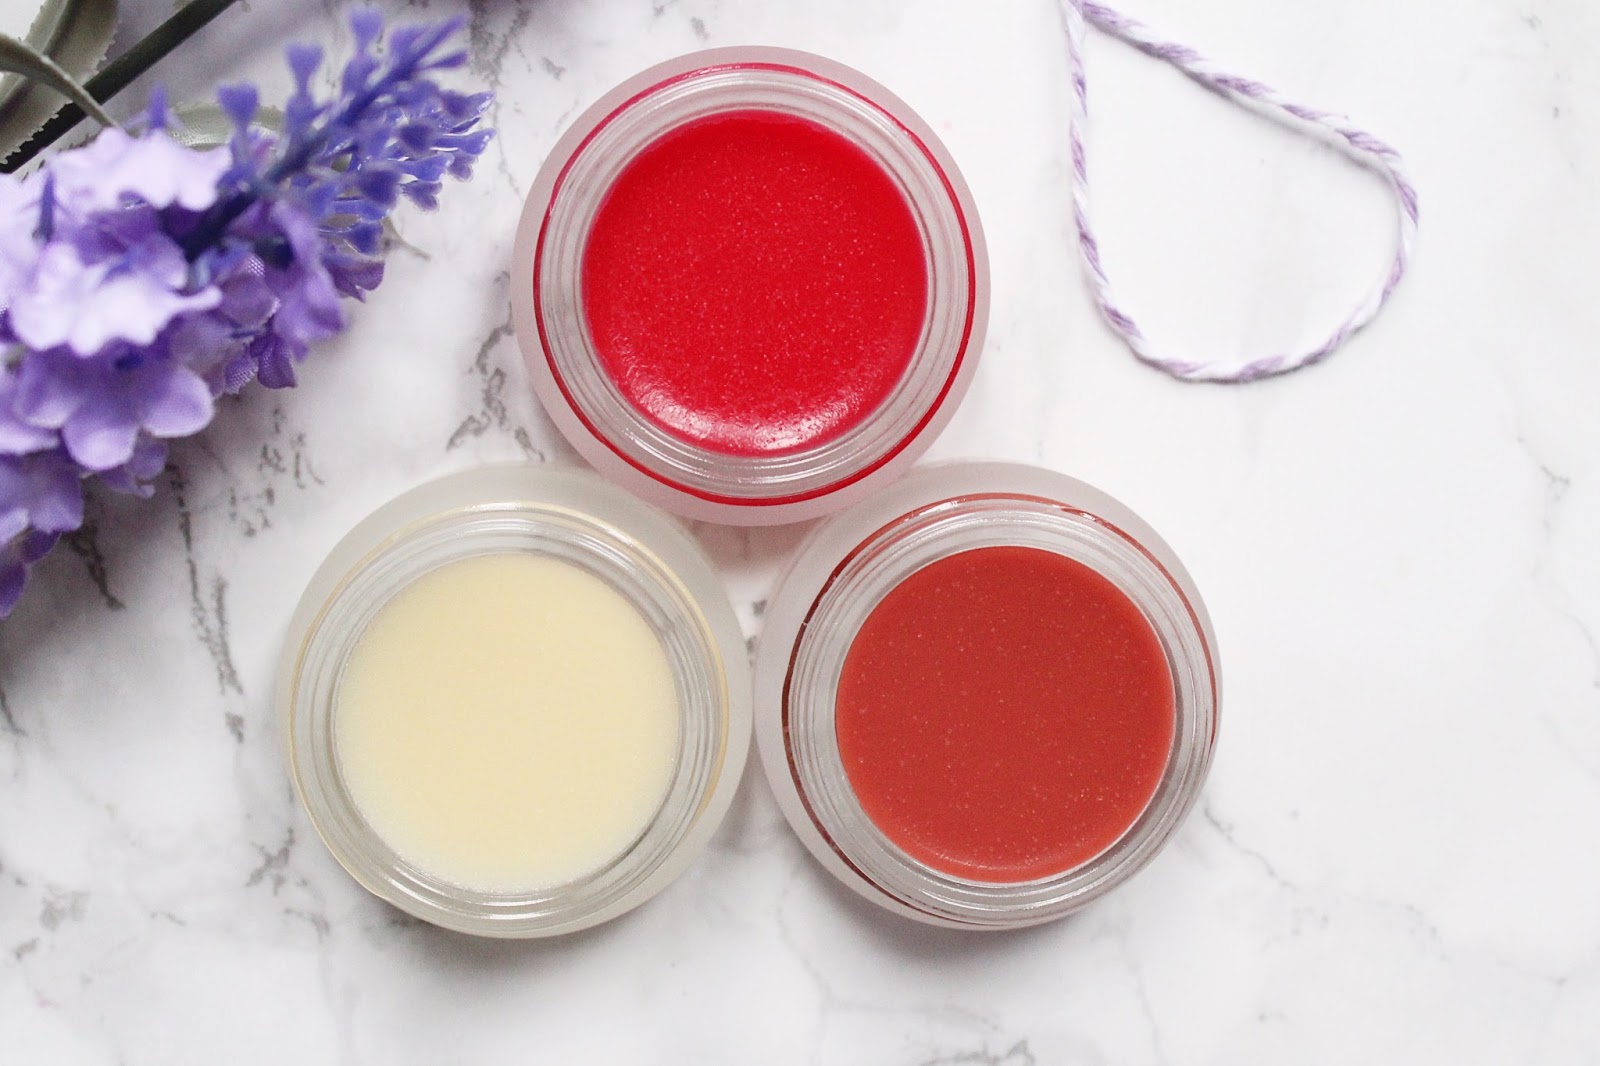 Tropic Lip Fudge Plumping Lip Conditioners Reviewed 